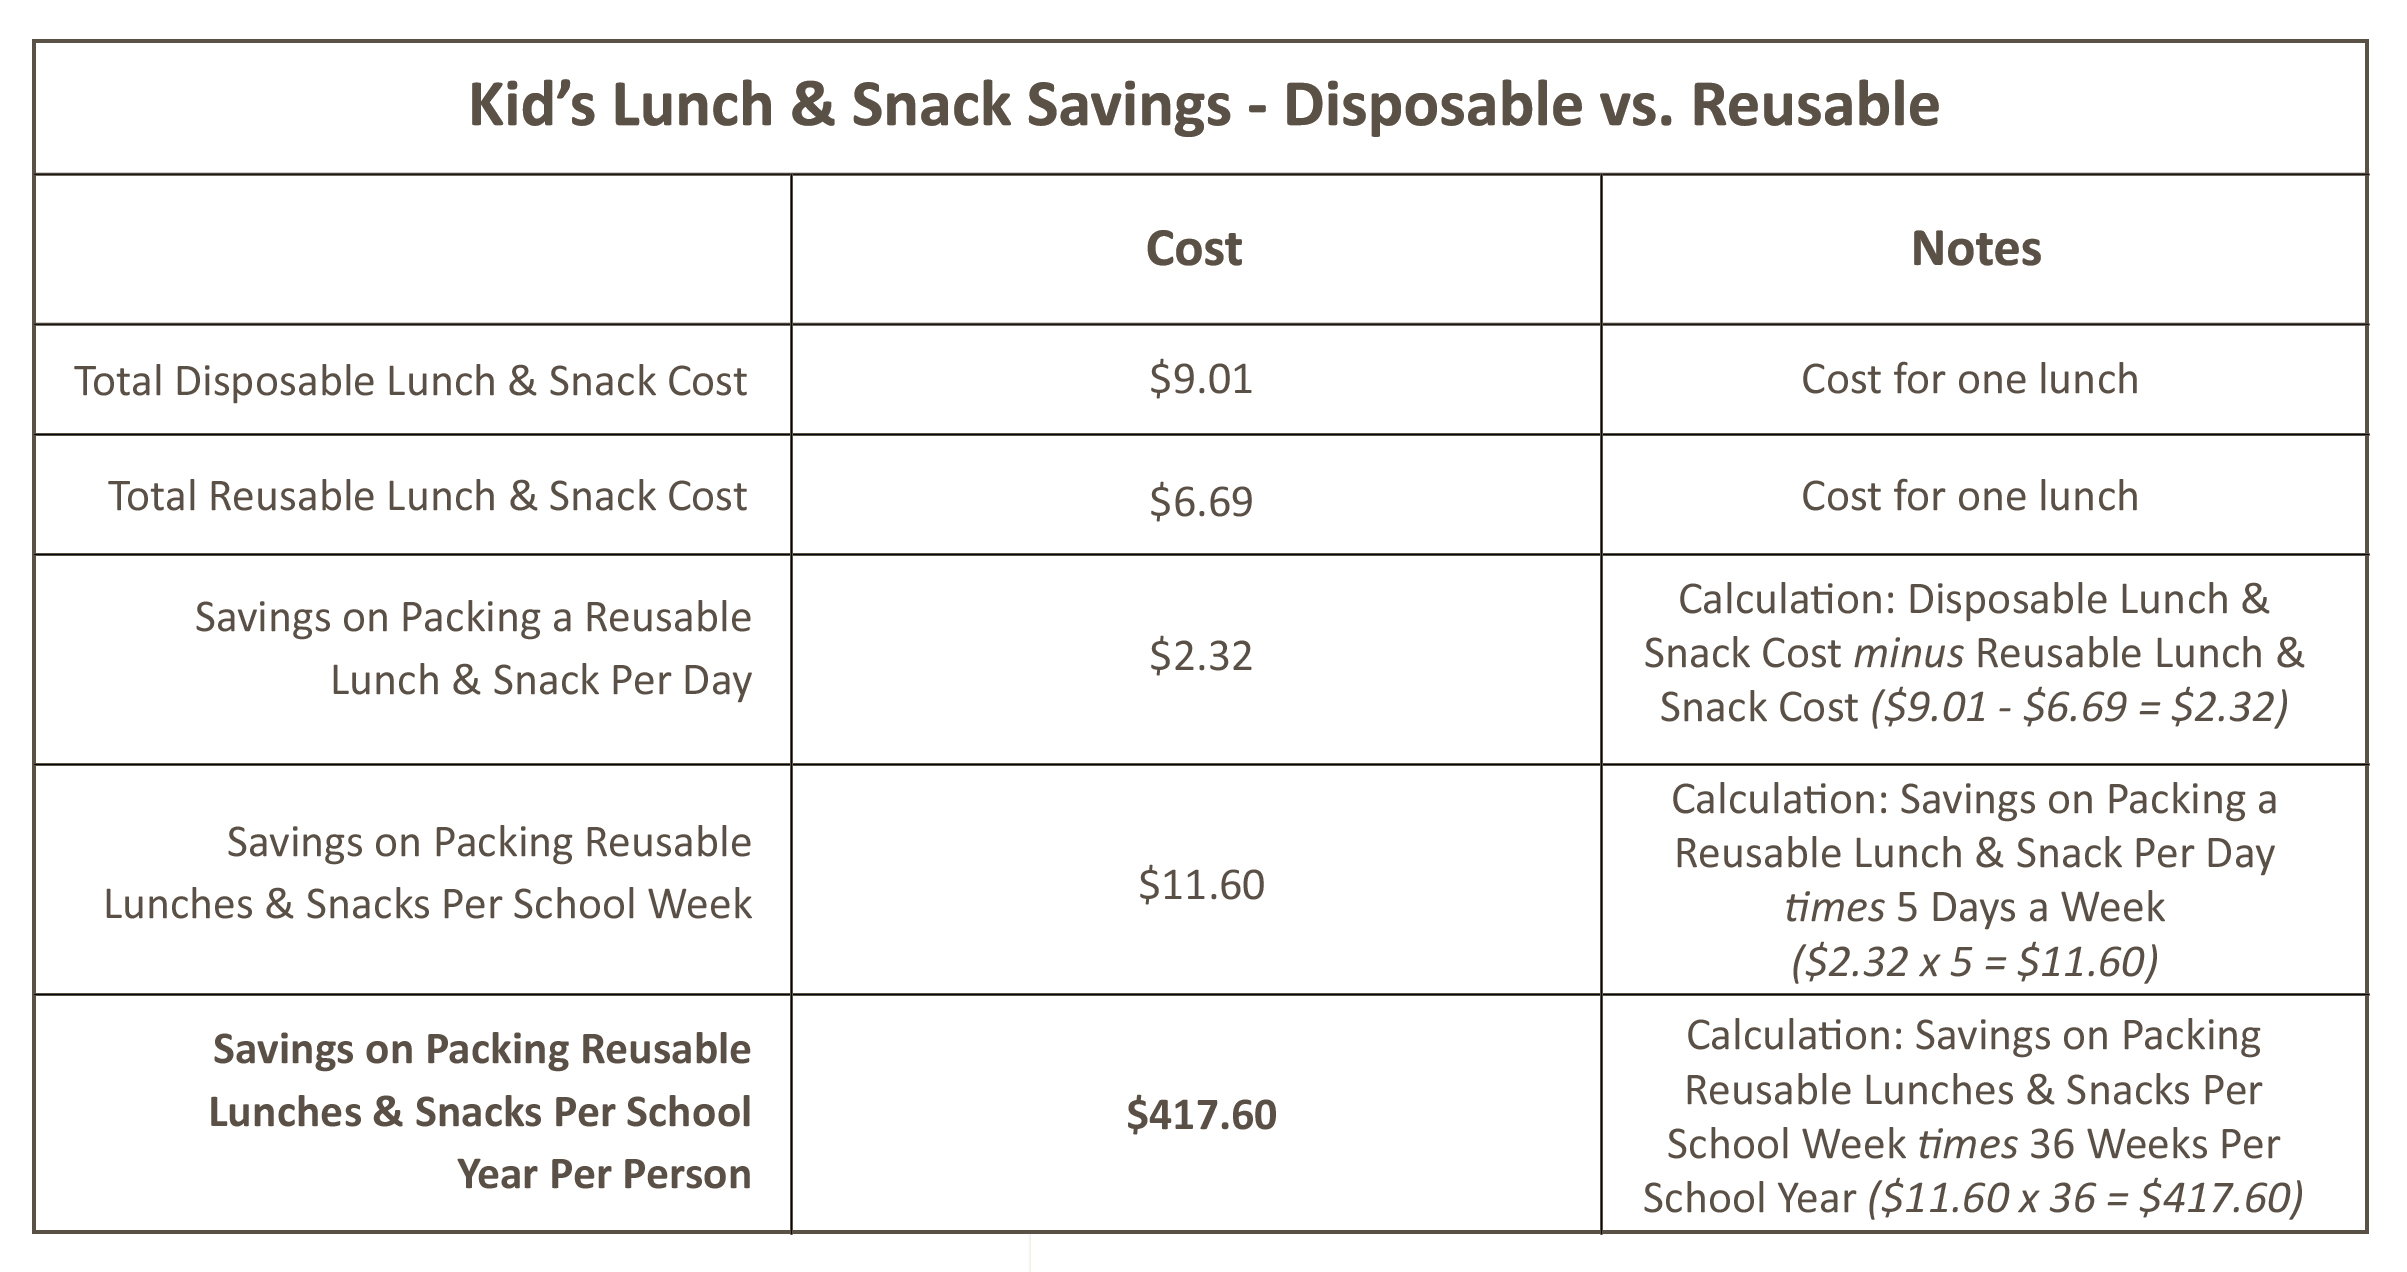 14 Essentials for Packing a Plastic Free Lunch - Center for Environmental  Health